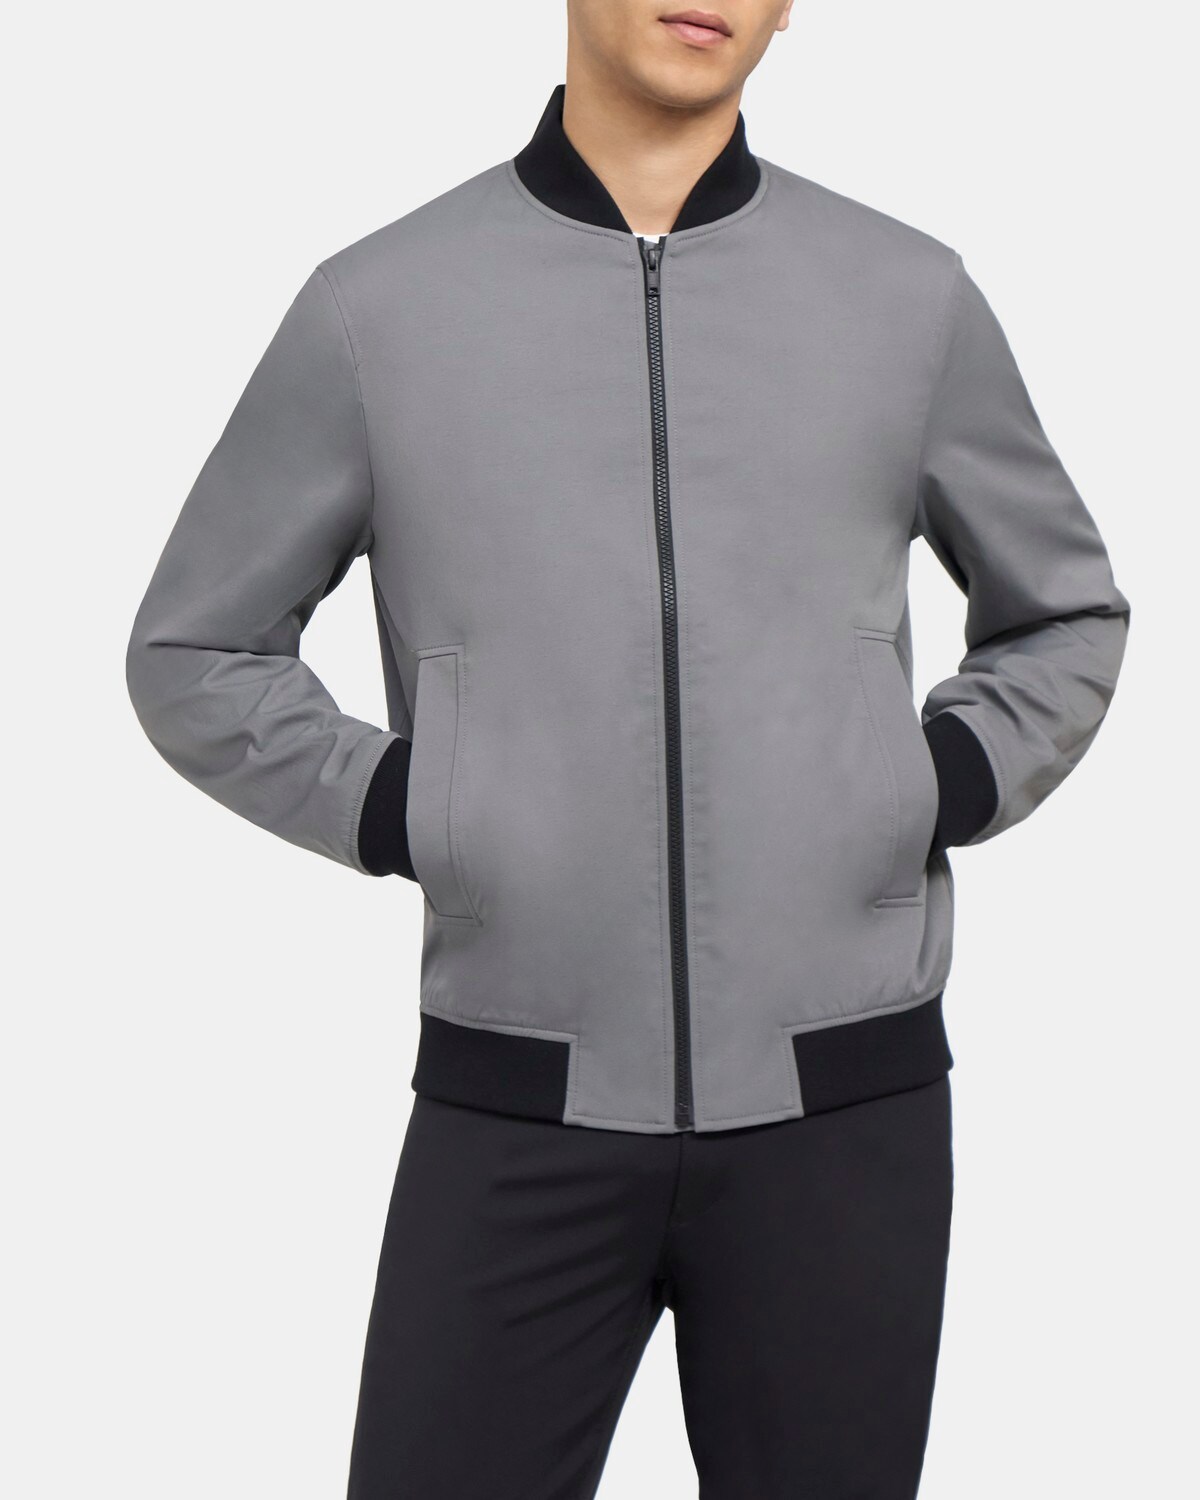 Bomber Jacket in Ascend Tech